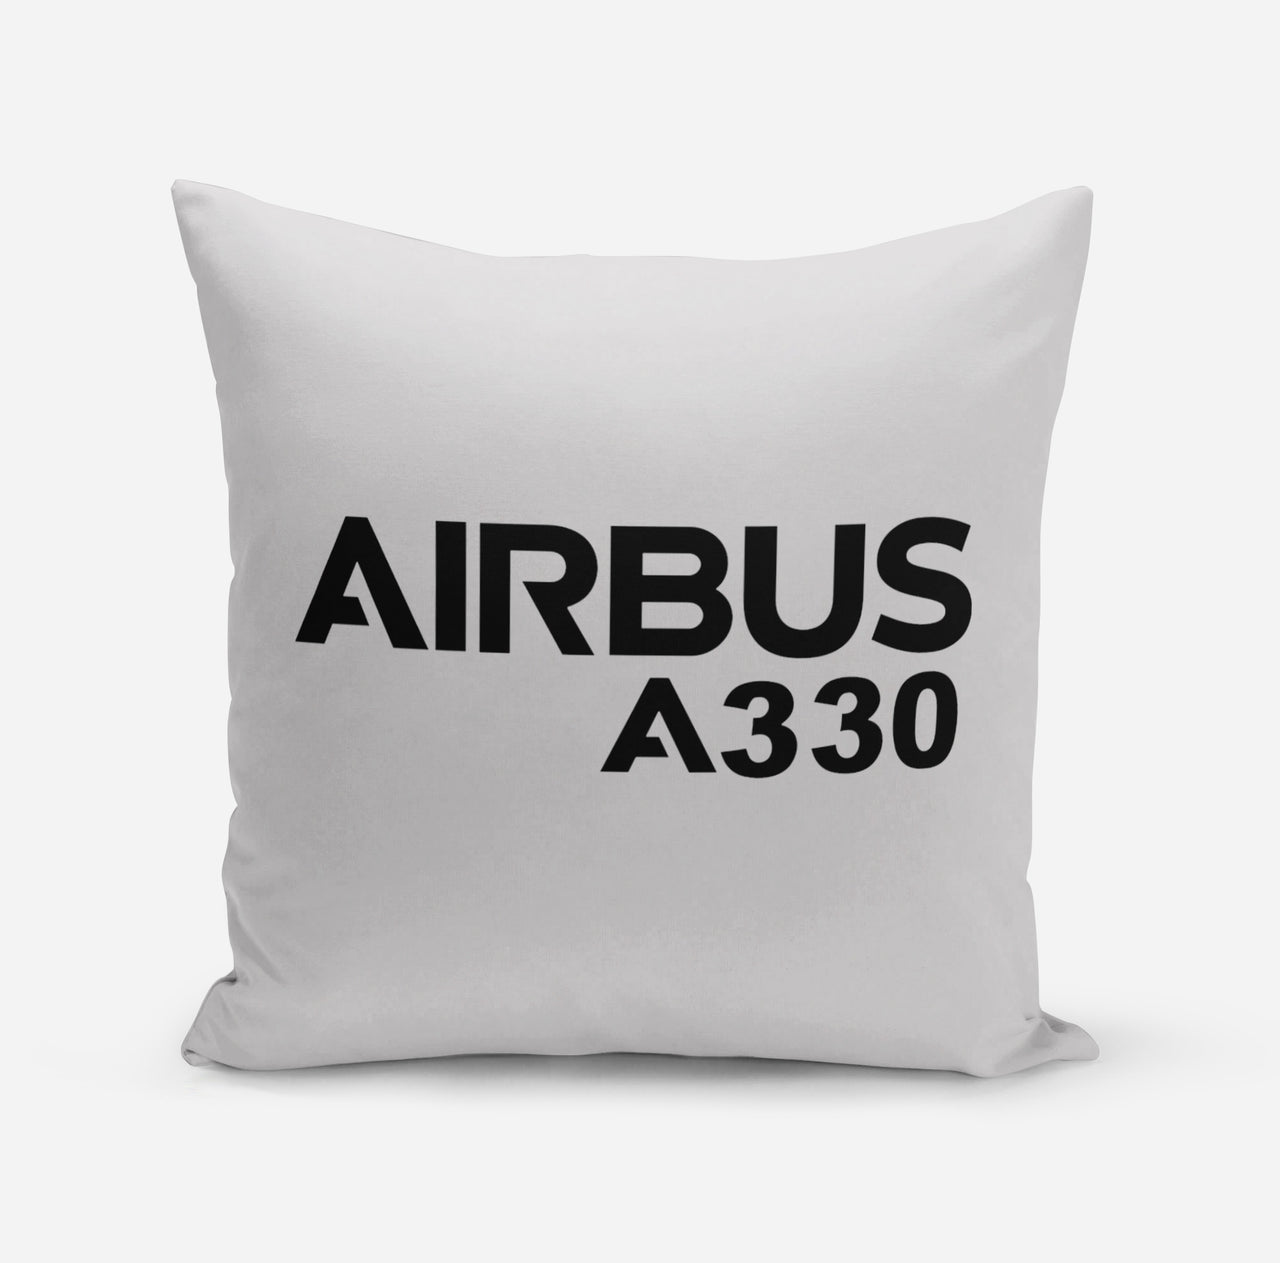 Airbus A330 & Text Designed Pillows